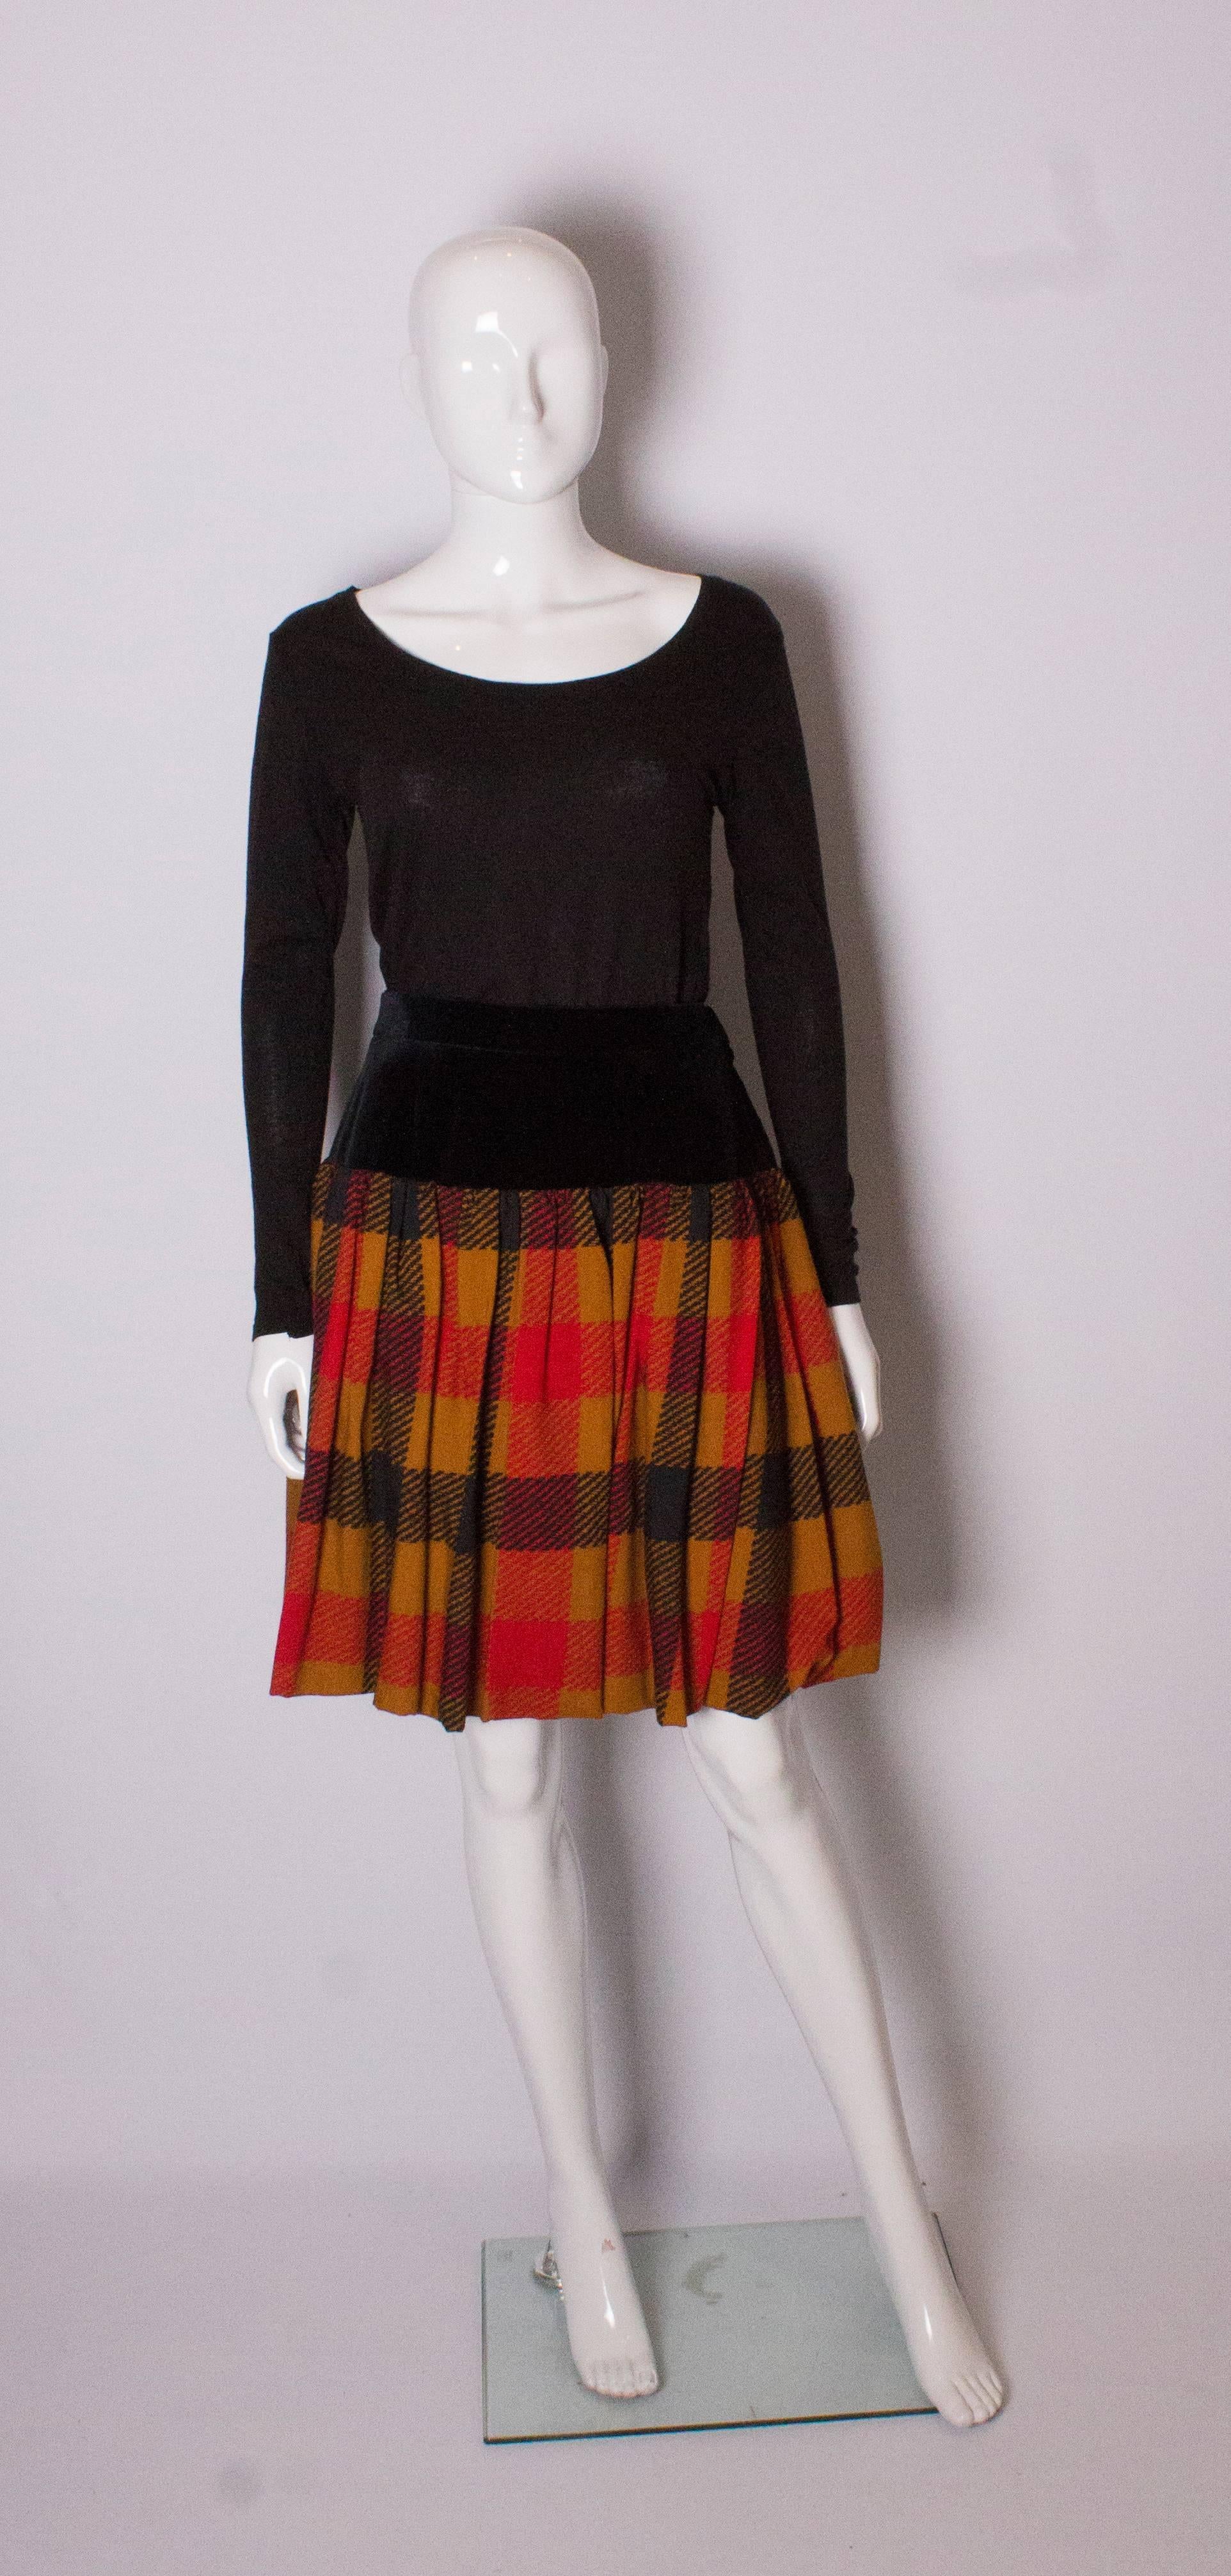 A great skirt by Yves Saint Laurent, Rve Gauche line. The skirt has a black velvet panel below the waist and then a gathered caramel check wool section. The skirt has a 6'' hem and can be let down if required. The skirt is fully lined and has